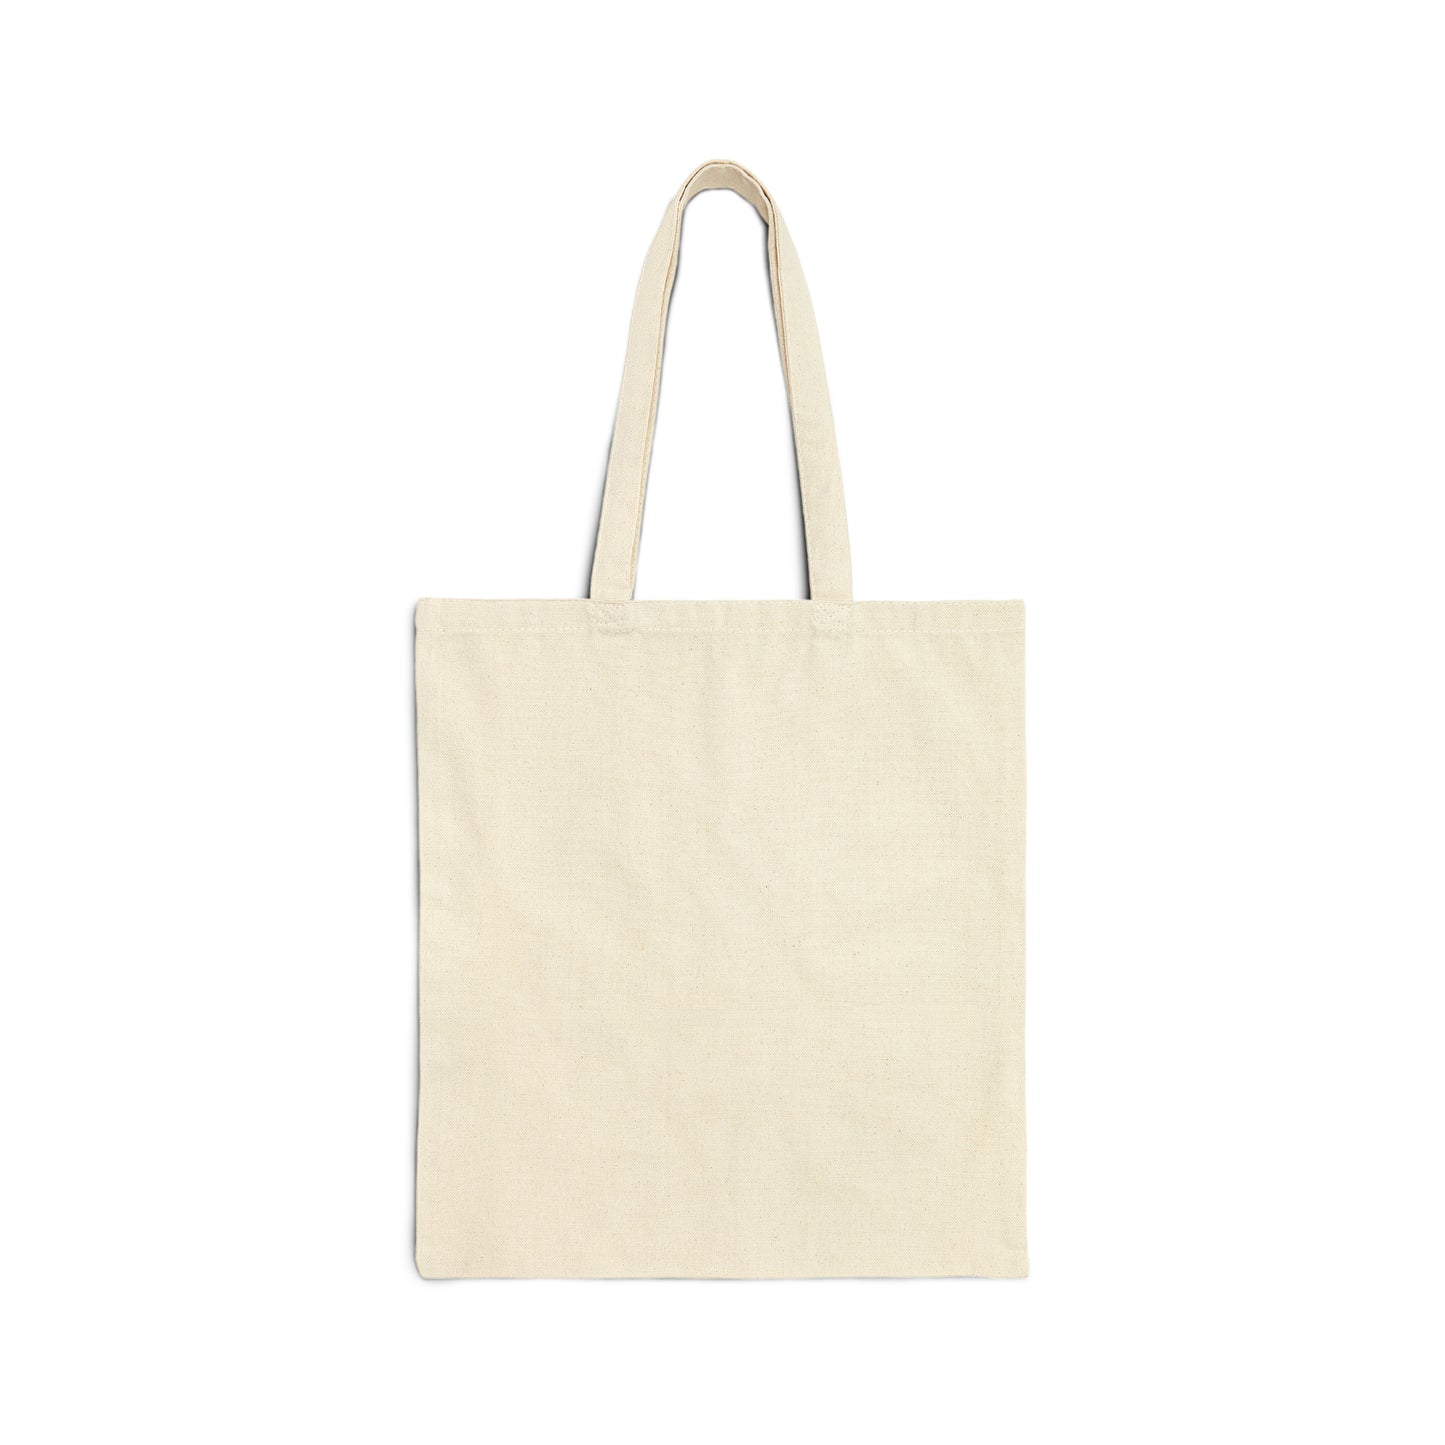 This is Just a Chapter- Not the Whole Story - Cotton Canvas Tote Bag